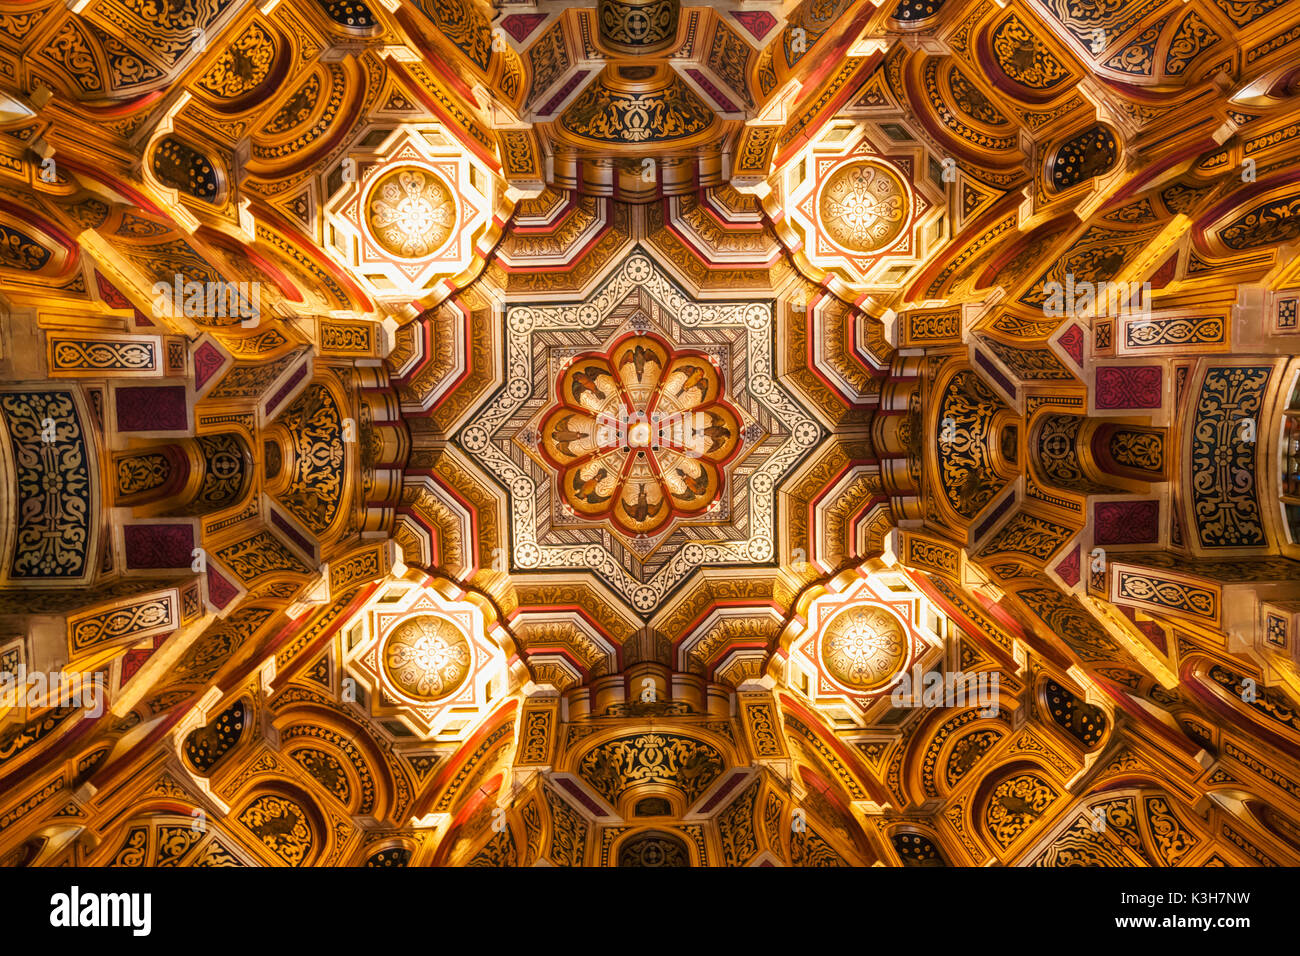 Wales, Cardiff, Cardiff Castle, The Arab Room Ceiling Stock Photo